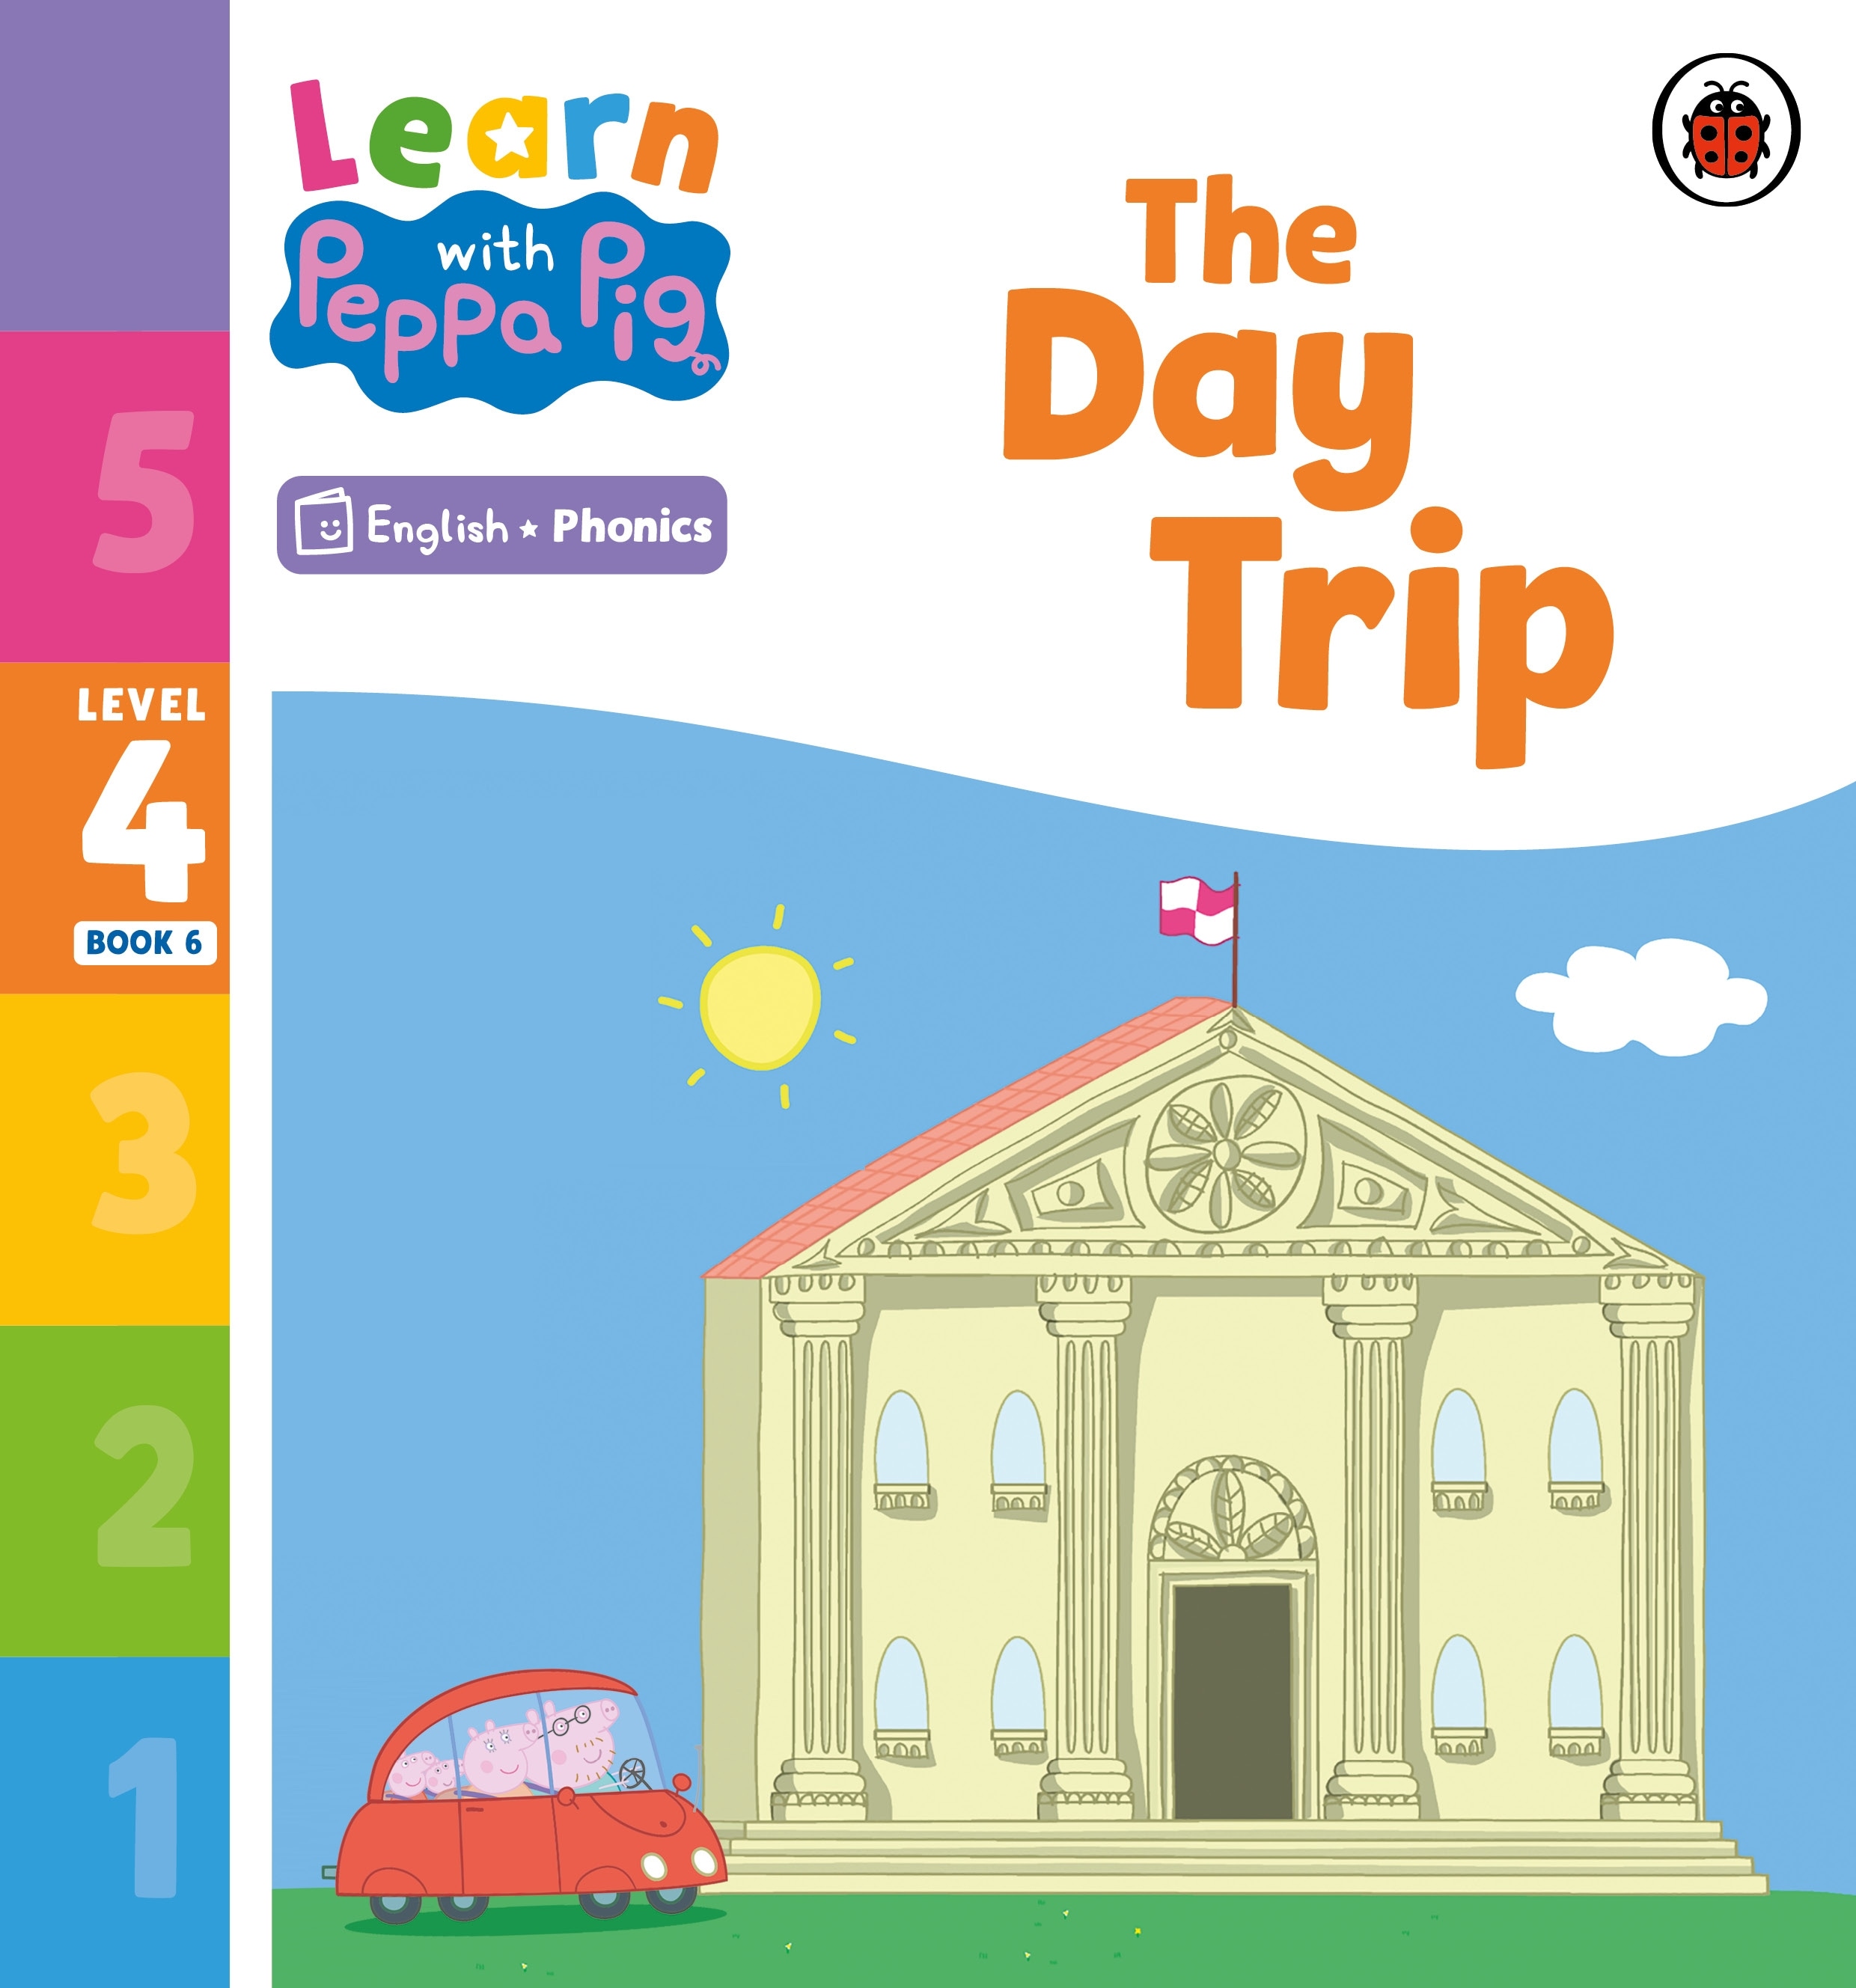 Learn with Peppa Phonics Level 4 Book 6 — The Day Trip (Phonics Reader)